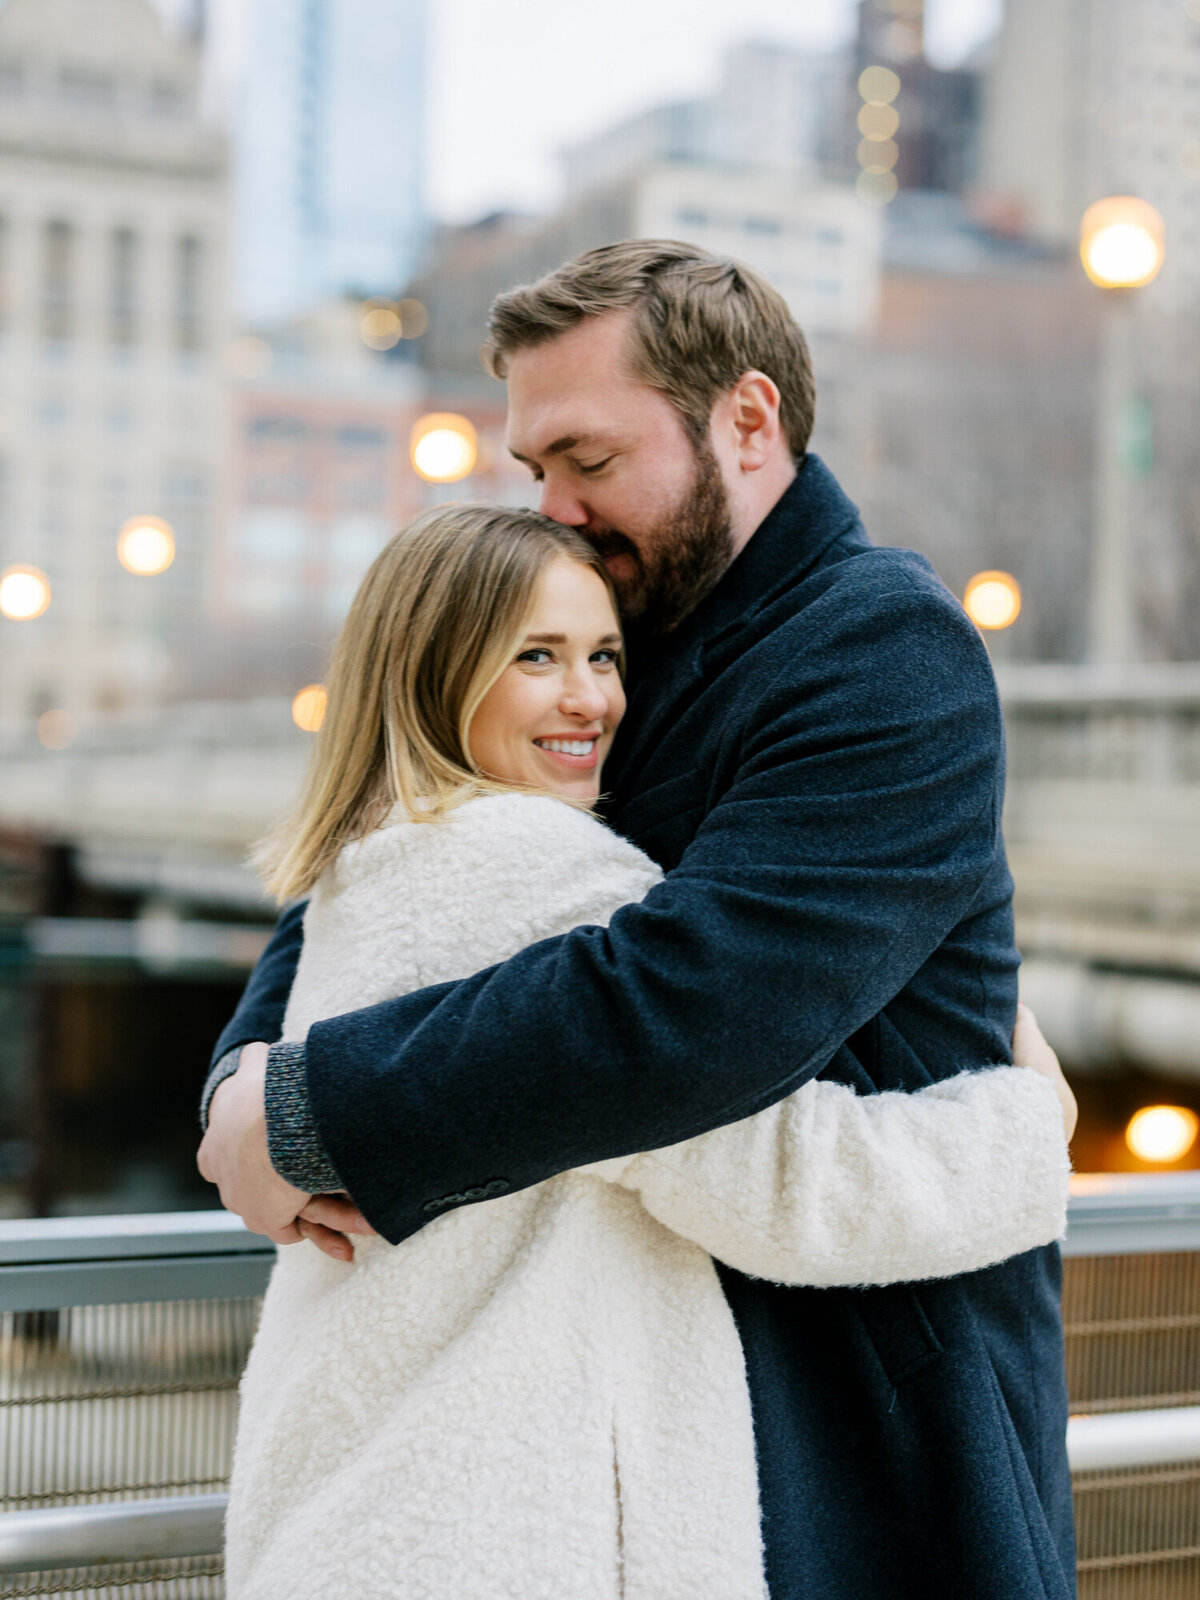 A candid engagement photo in downtown Chicago